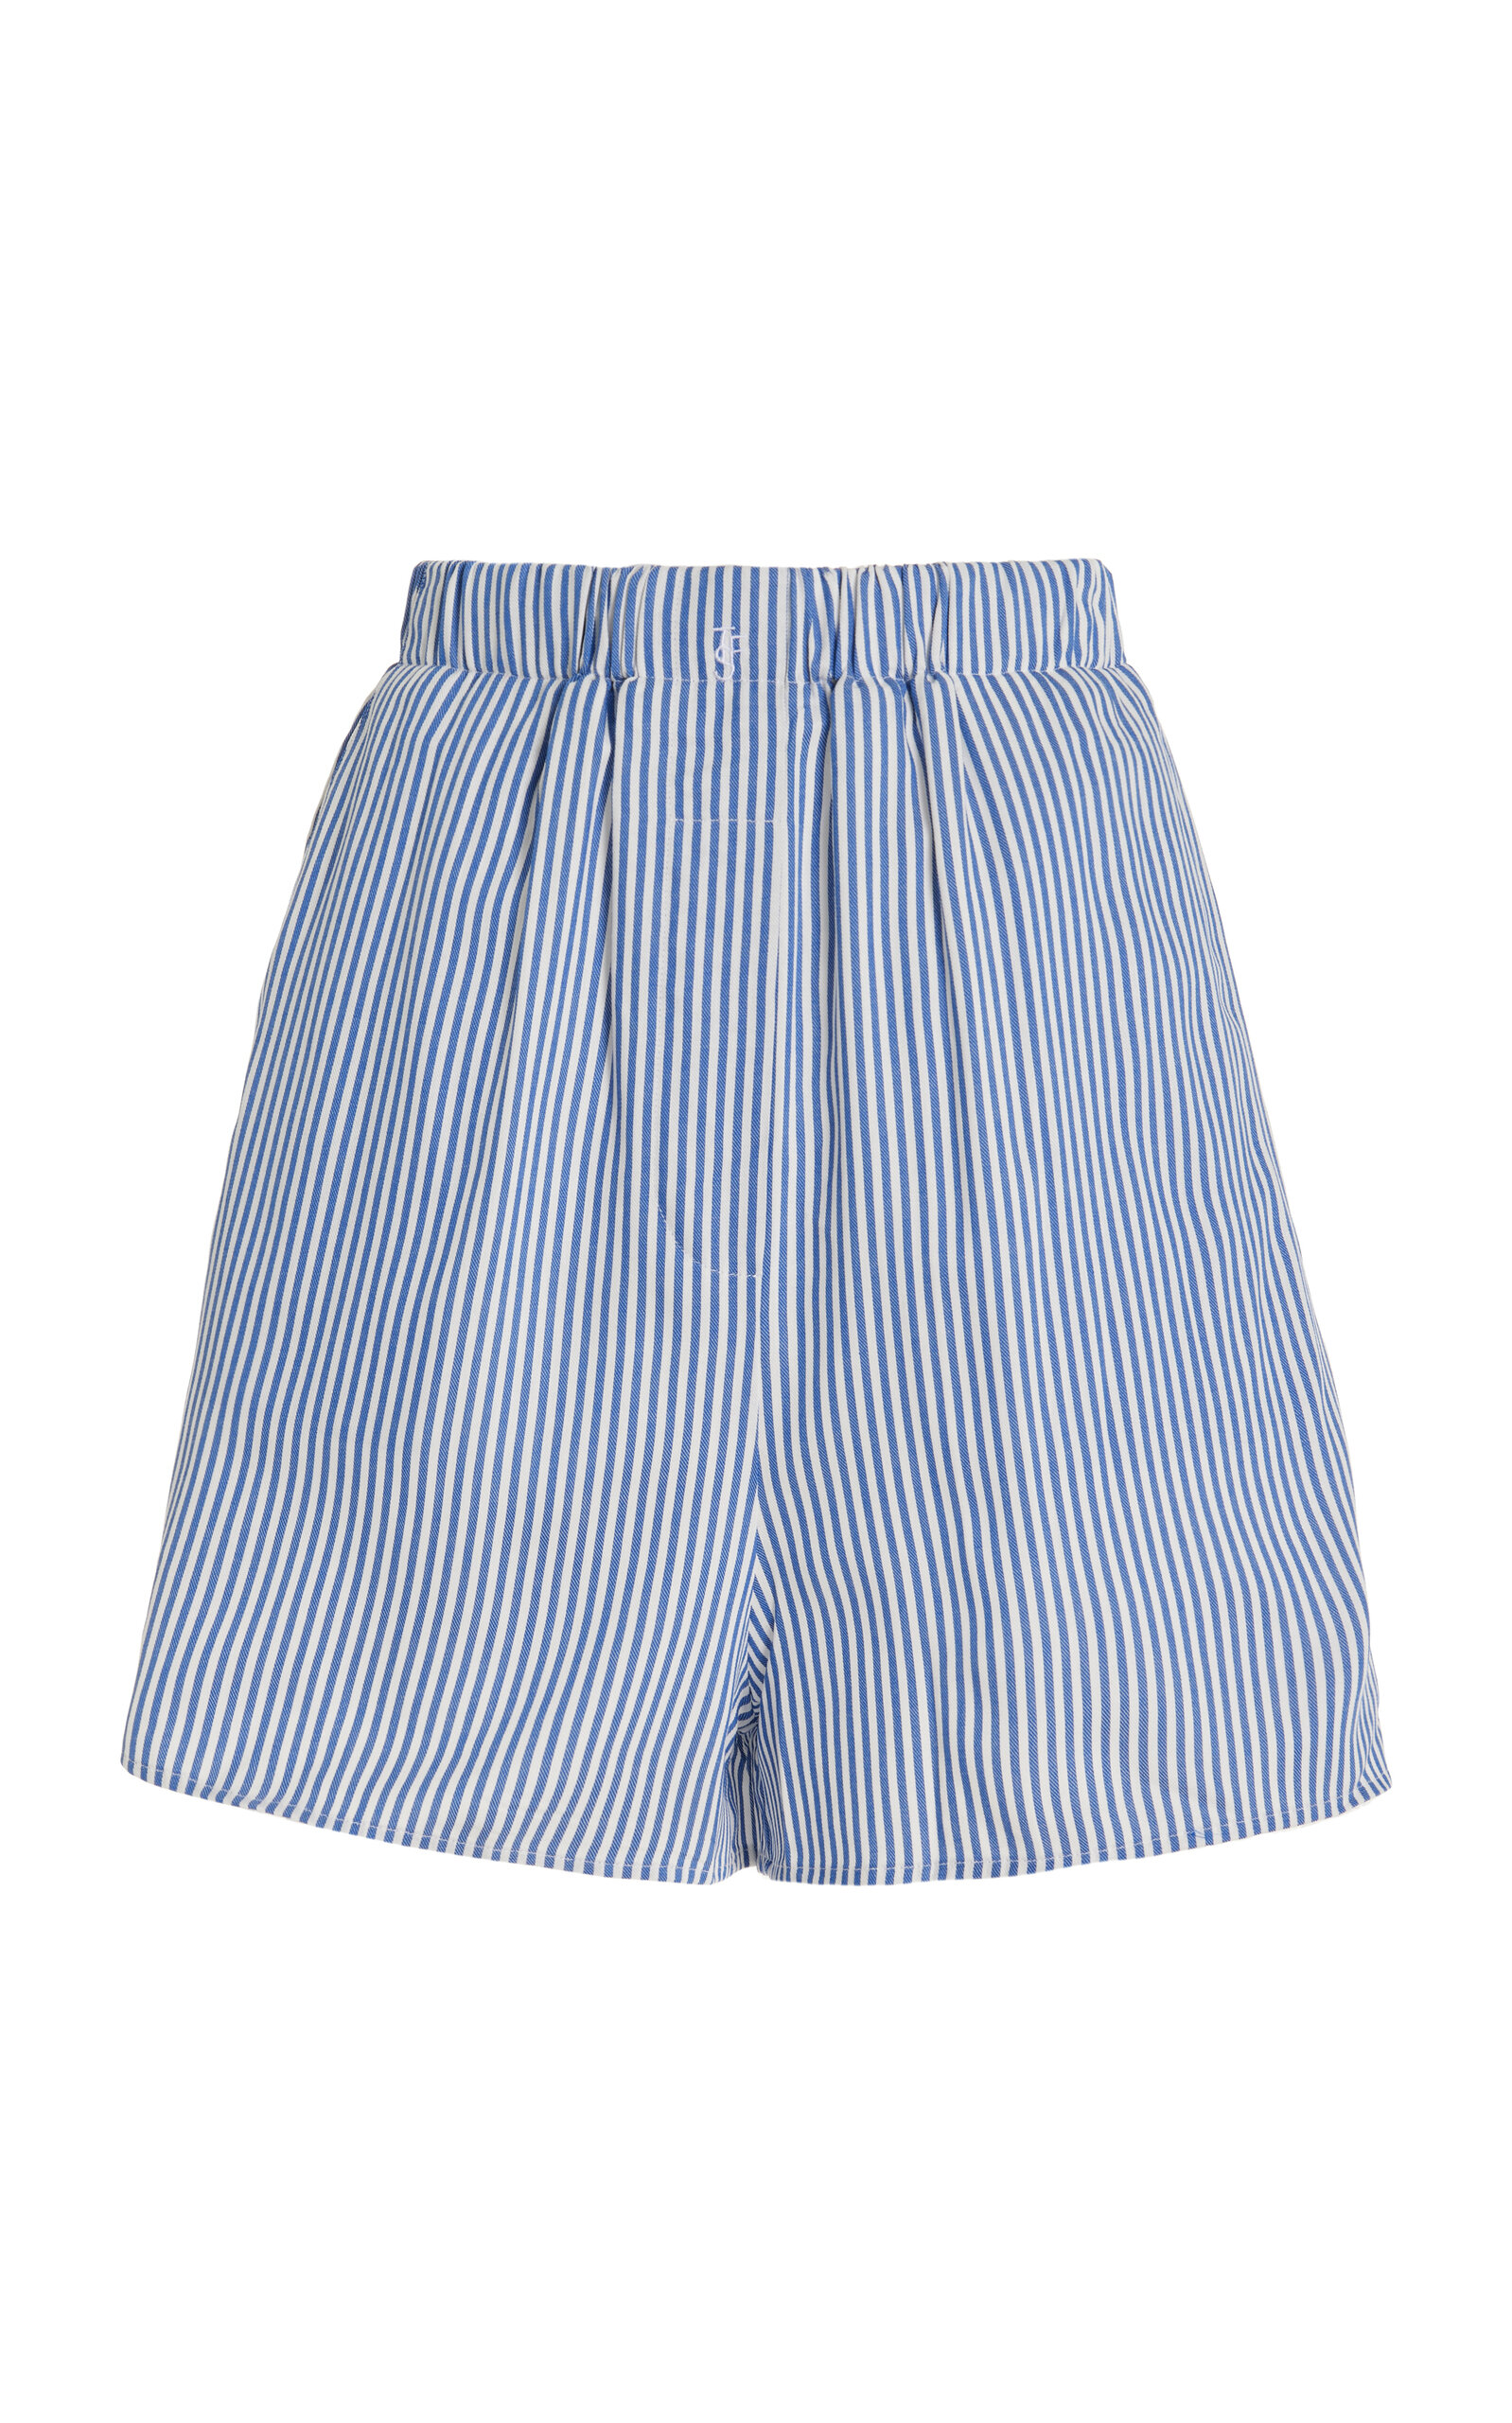 The Frankie Shop Lui Striped Twill Boxer Shorts In Blue